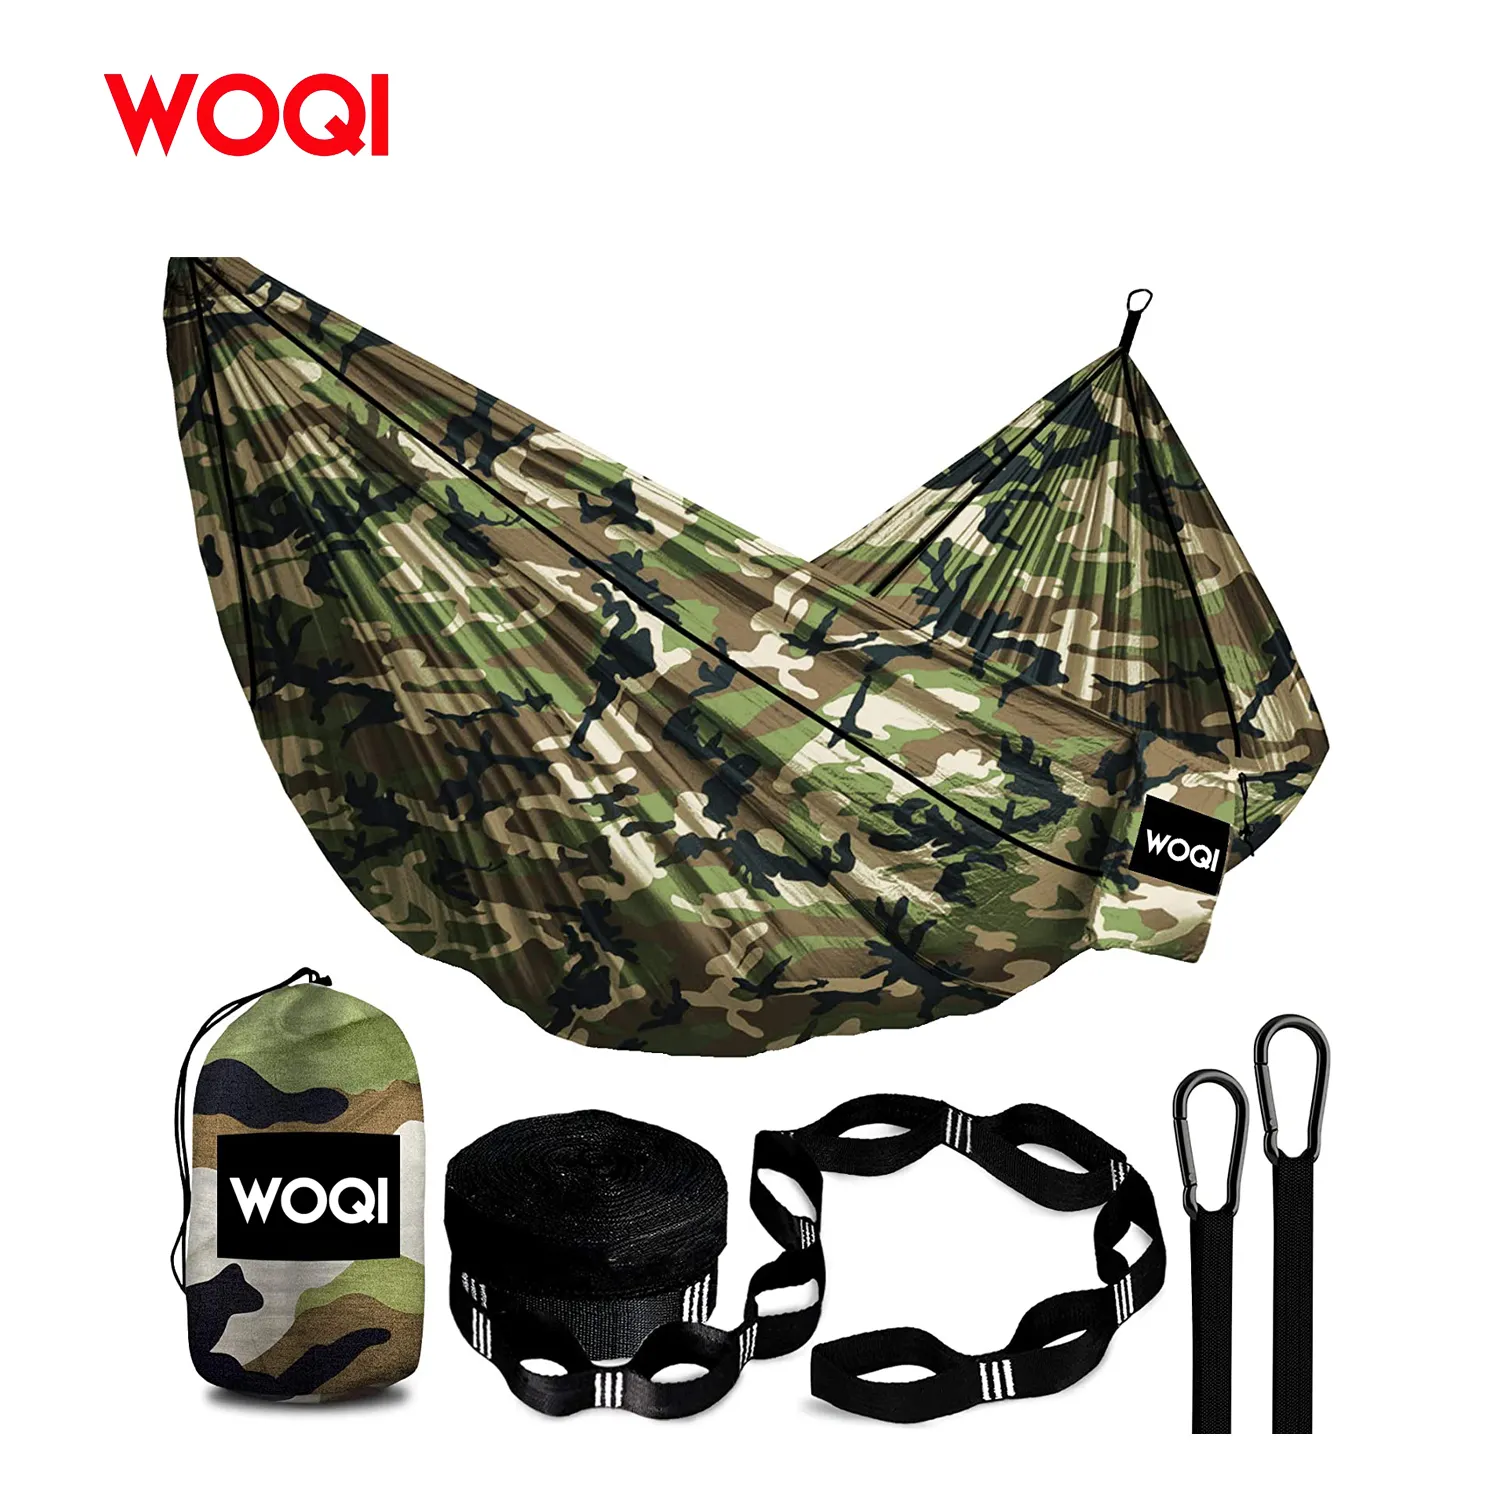 WOQI Parachute portable Nylon Camping Hammock with tree straps adjustable Cinch Buckle outdoor